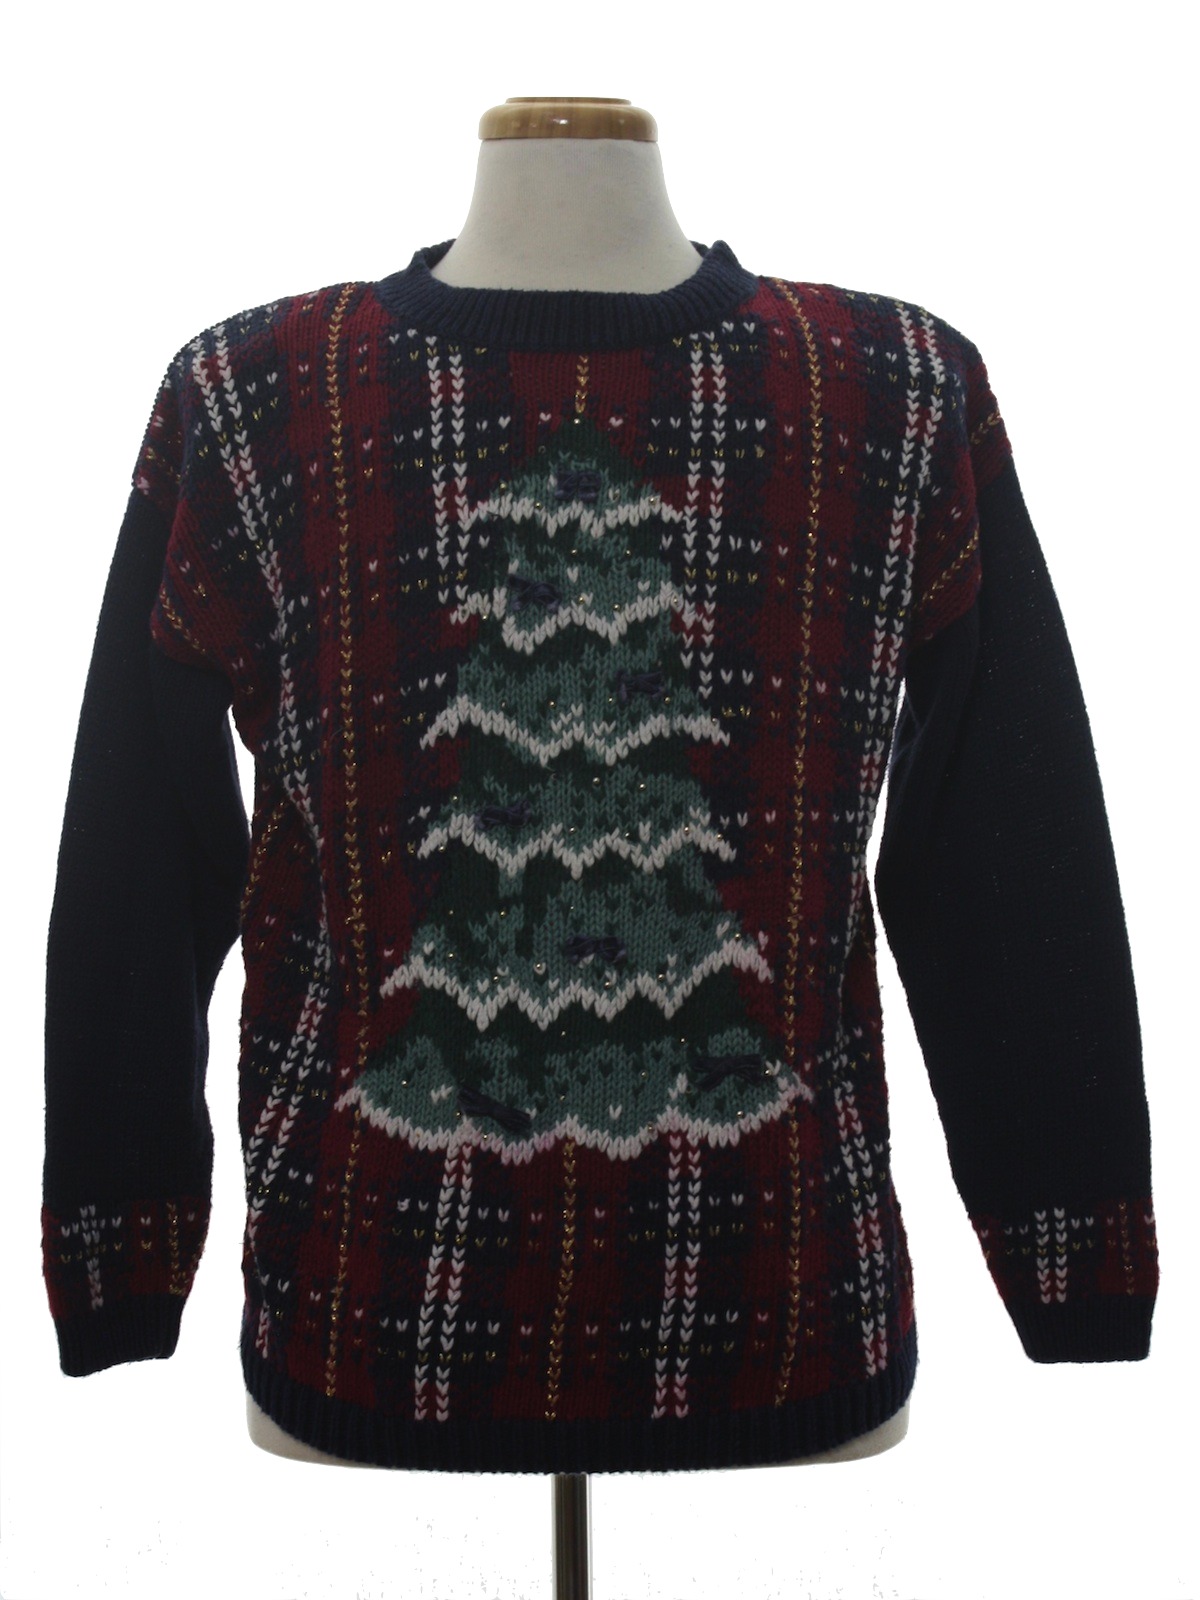 Ugly Christmas Sweater: -Id Distinctions- Unisex navy blue and maroon ...